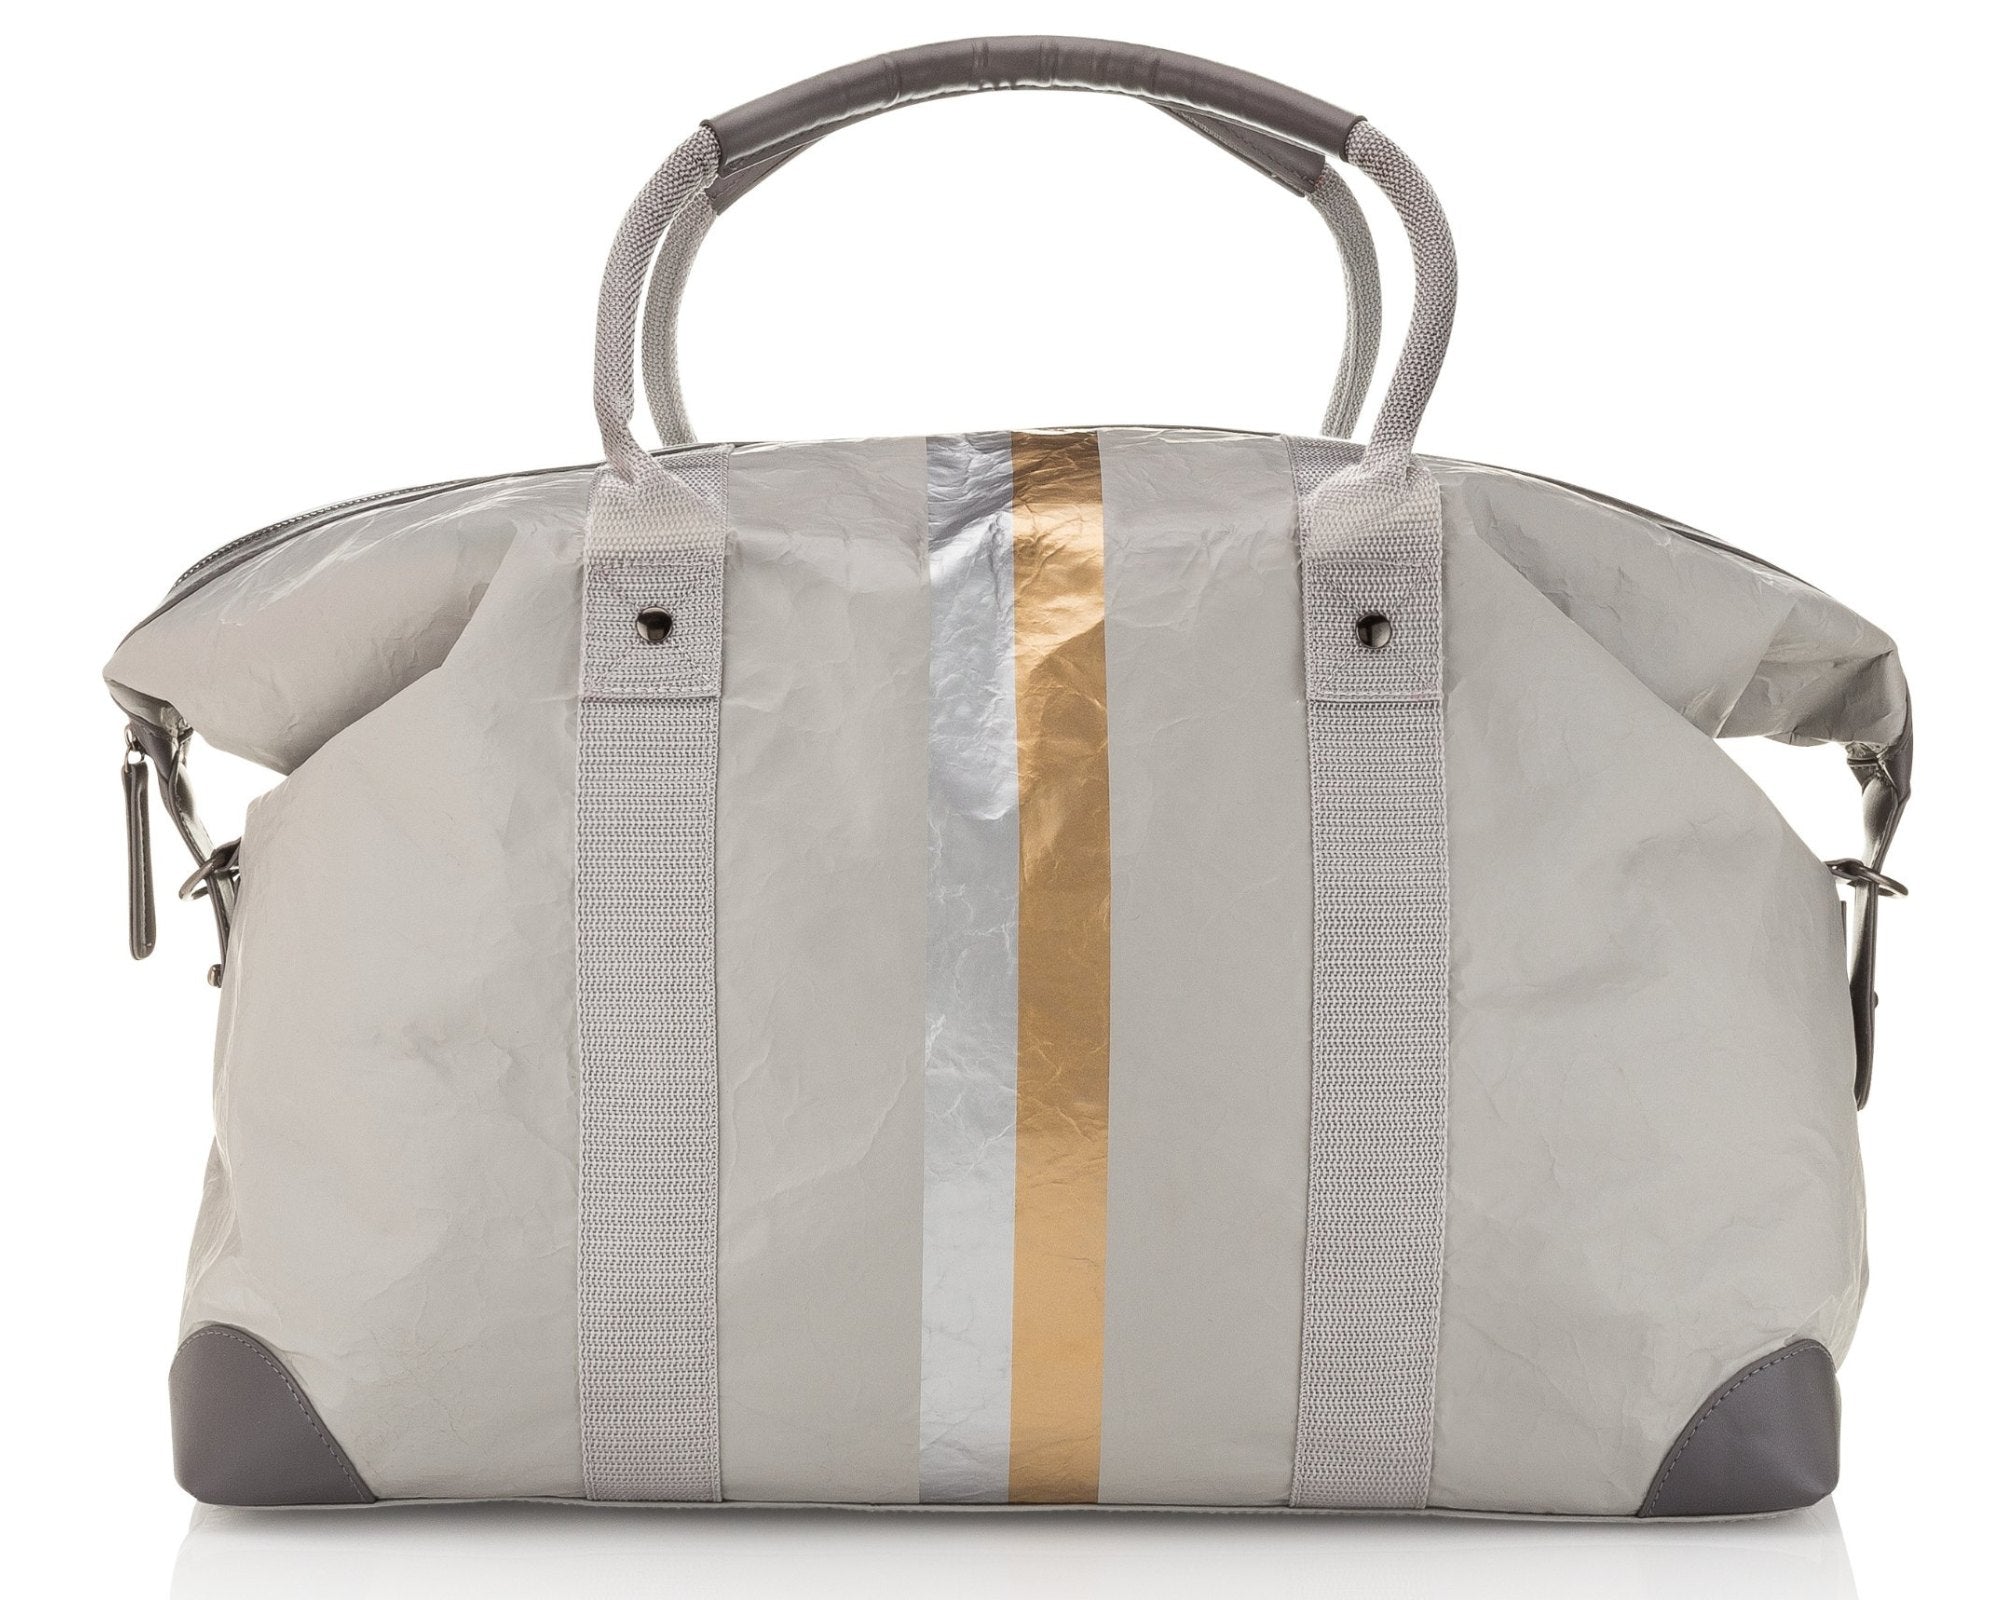 Weekend bags: travel in style